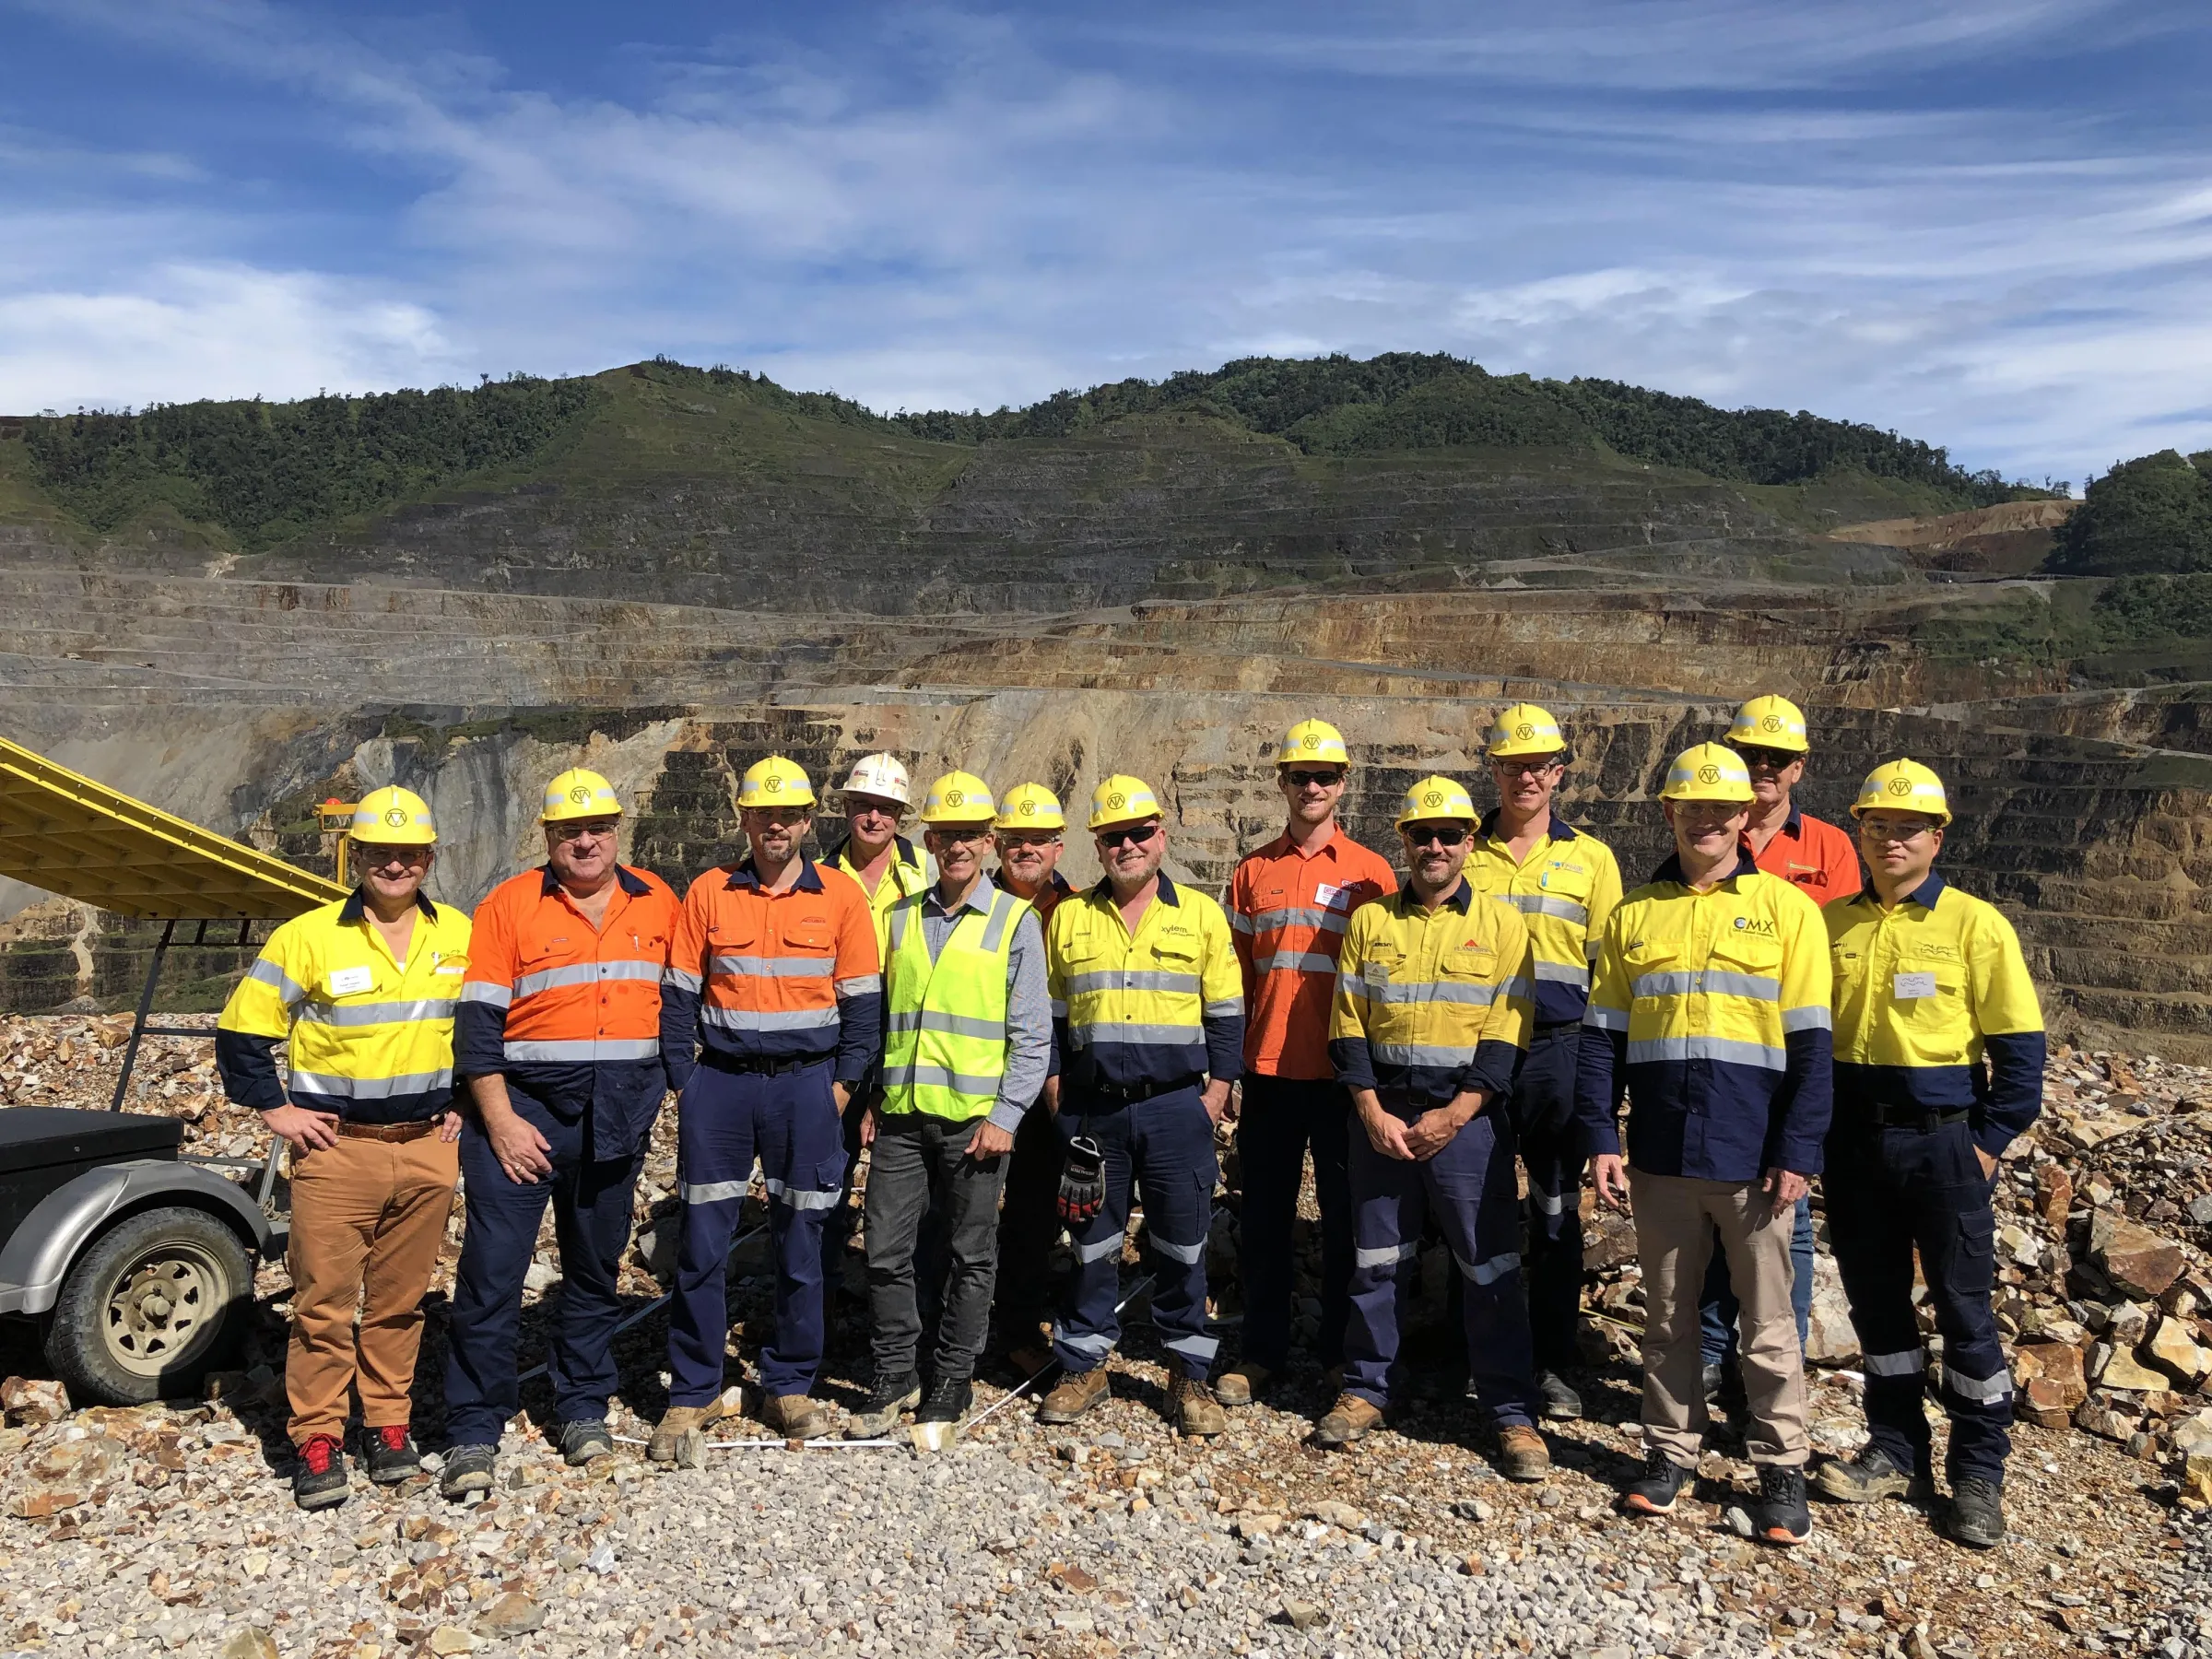 group picture of mining people on mining site